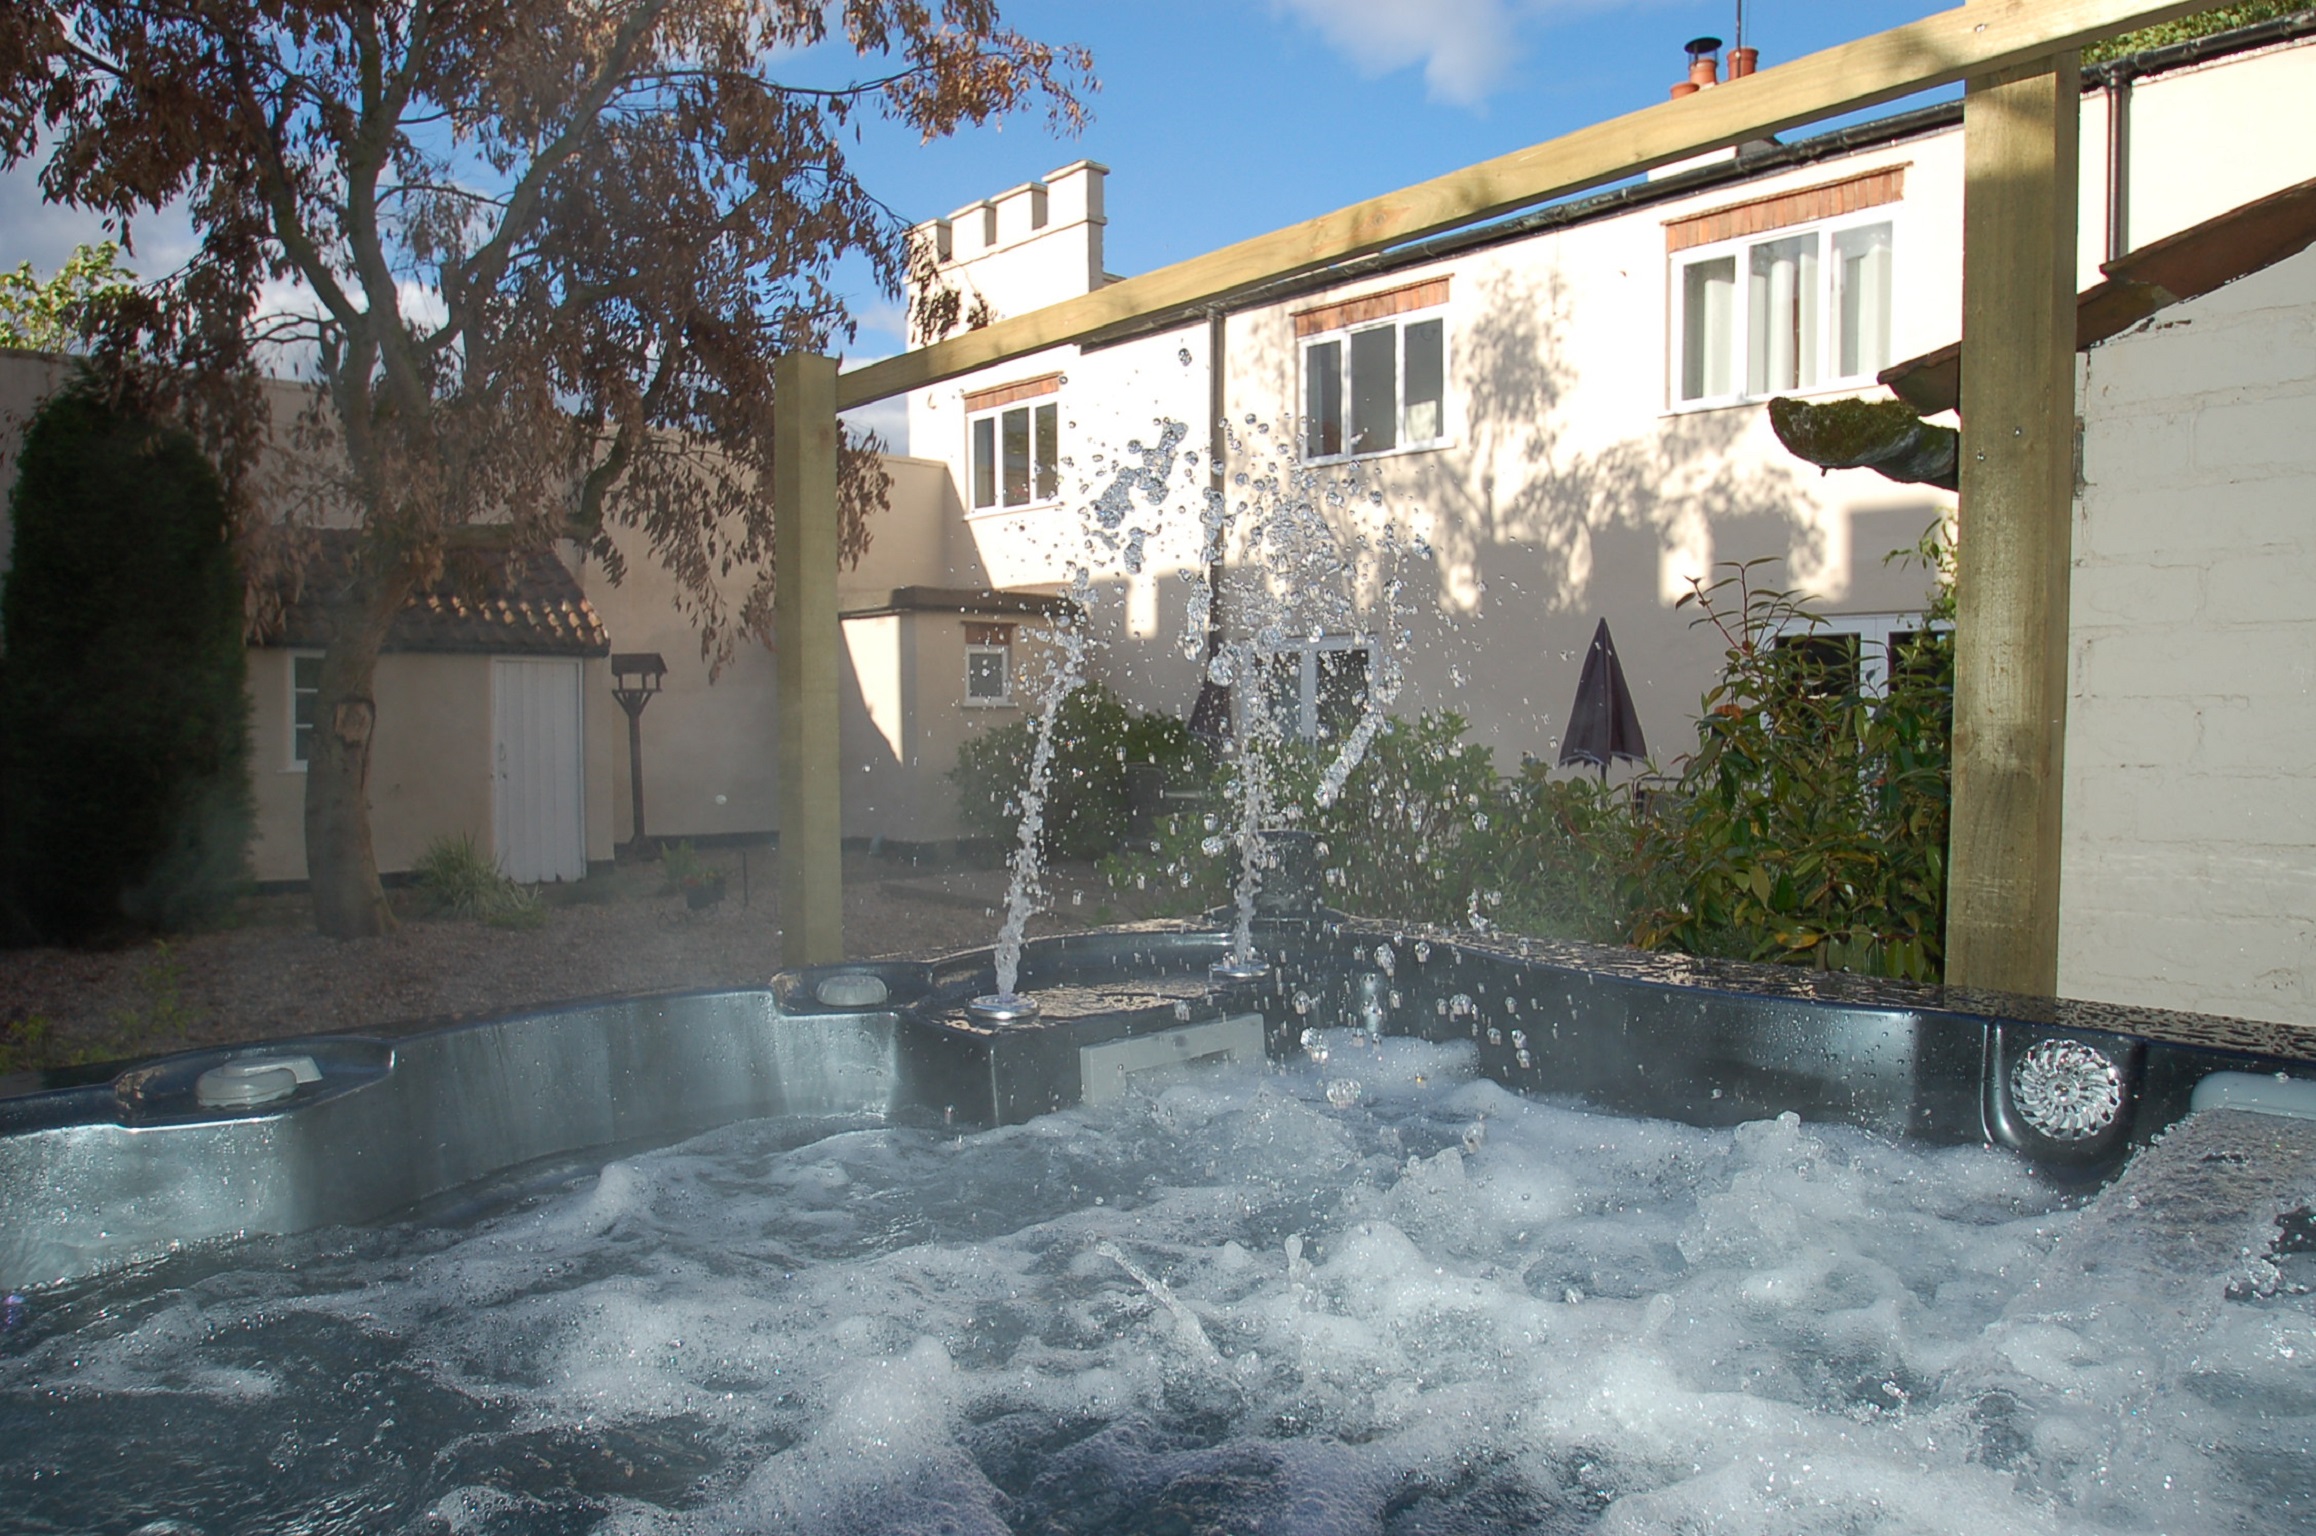 Courtyard and Hydrotherapy hot tub